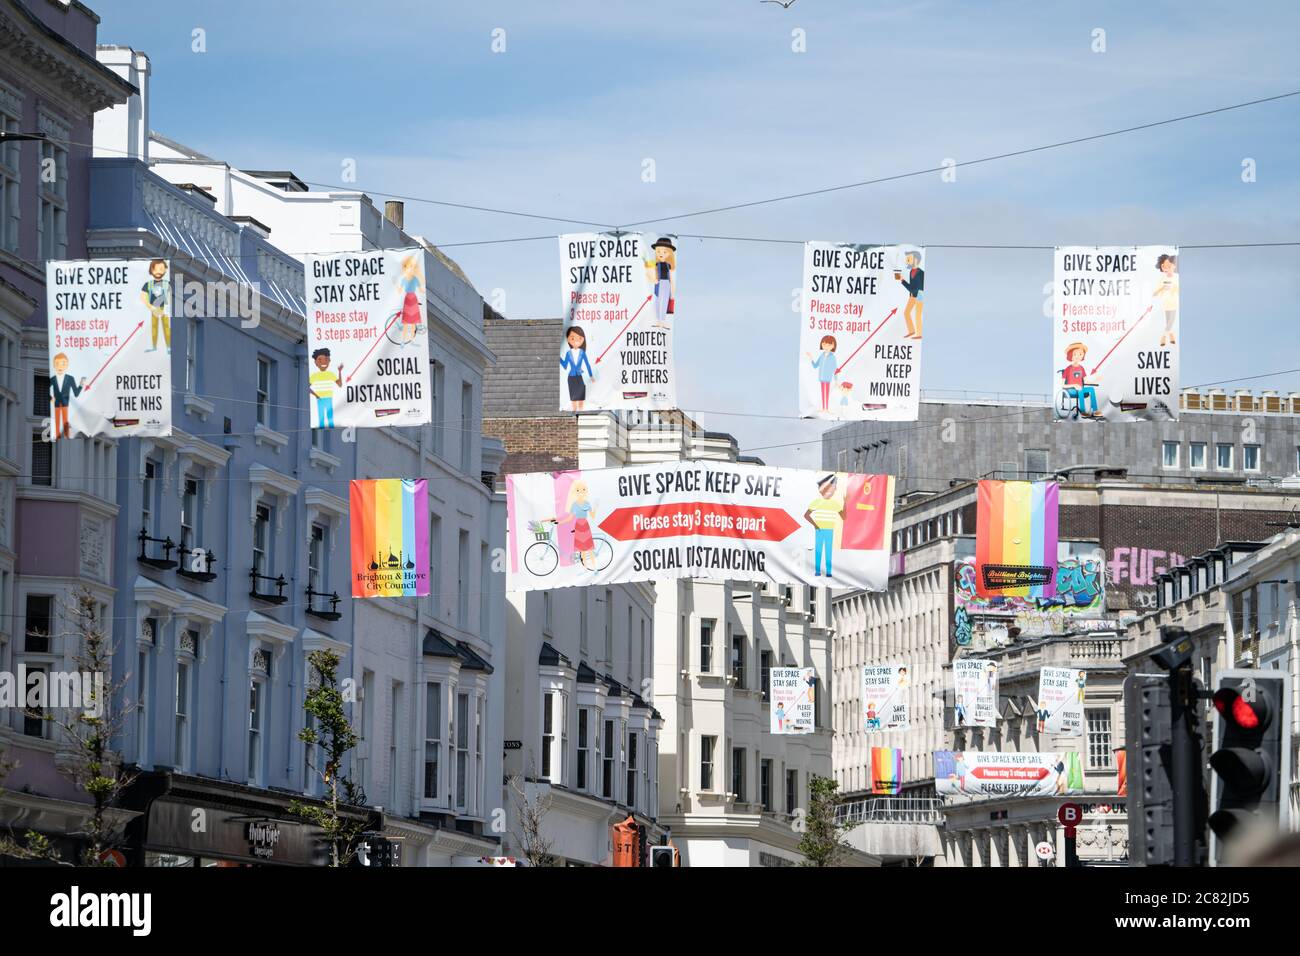 Coronavirus / covid-19 banners give space, stay safe, social distancing above a street in Brighton, UK, 2020. Stock Photo